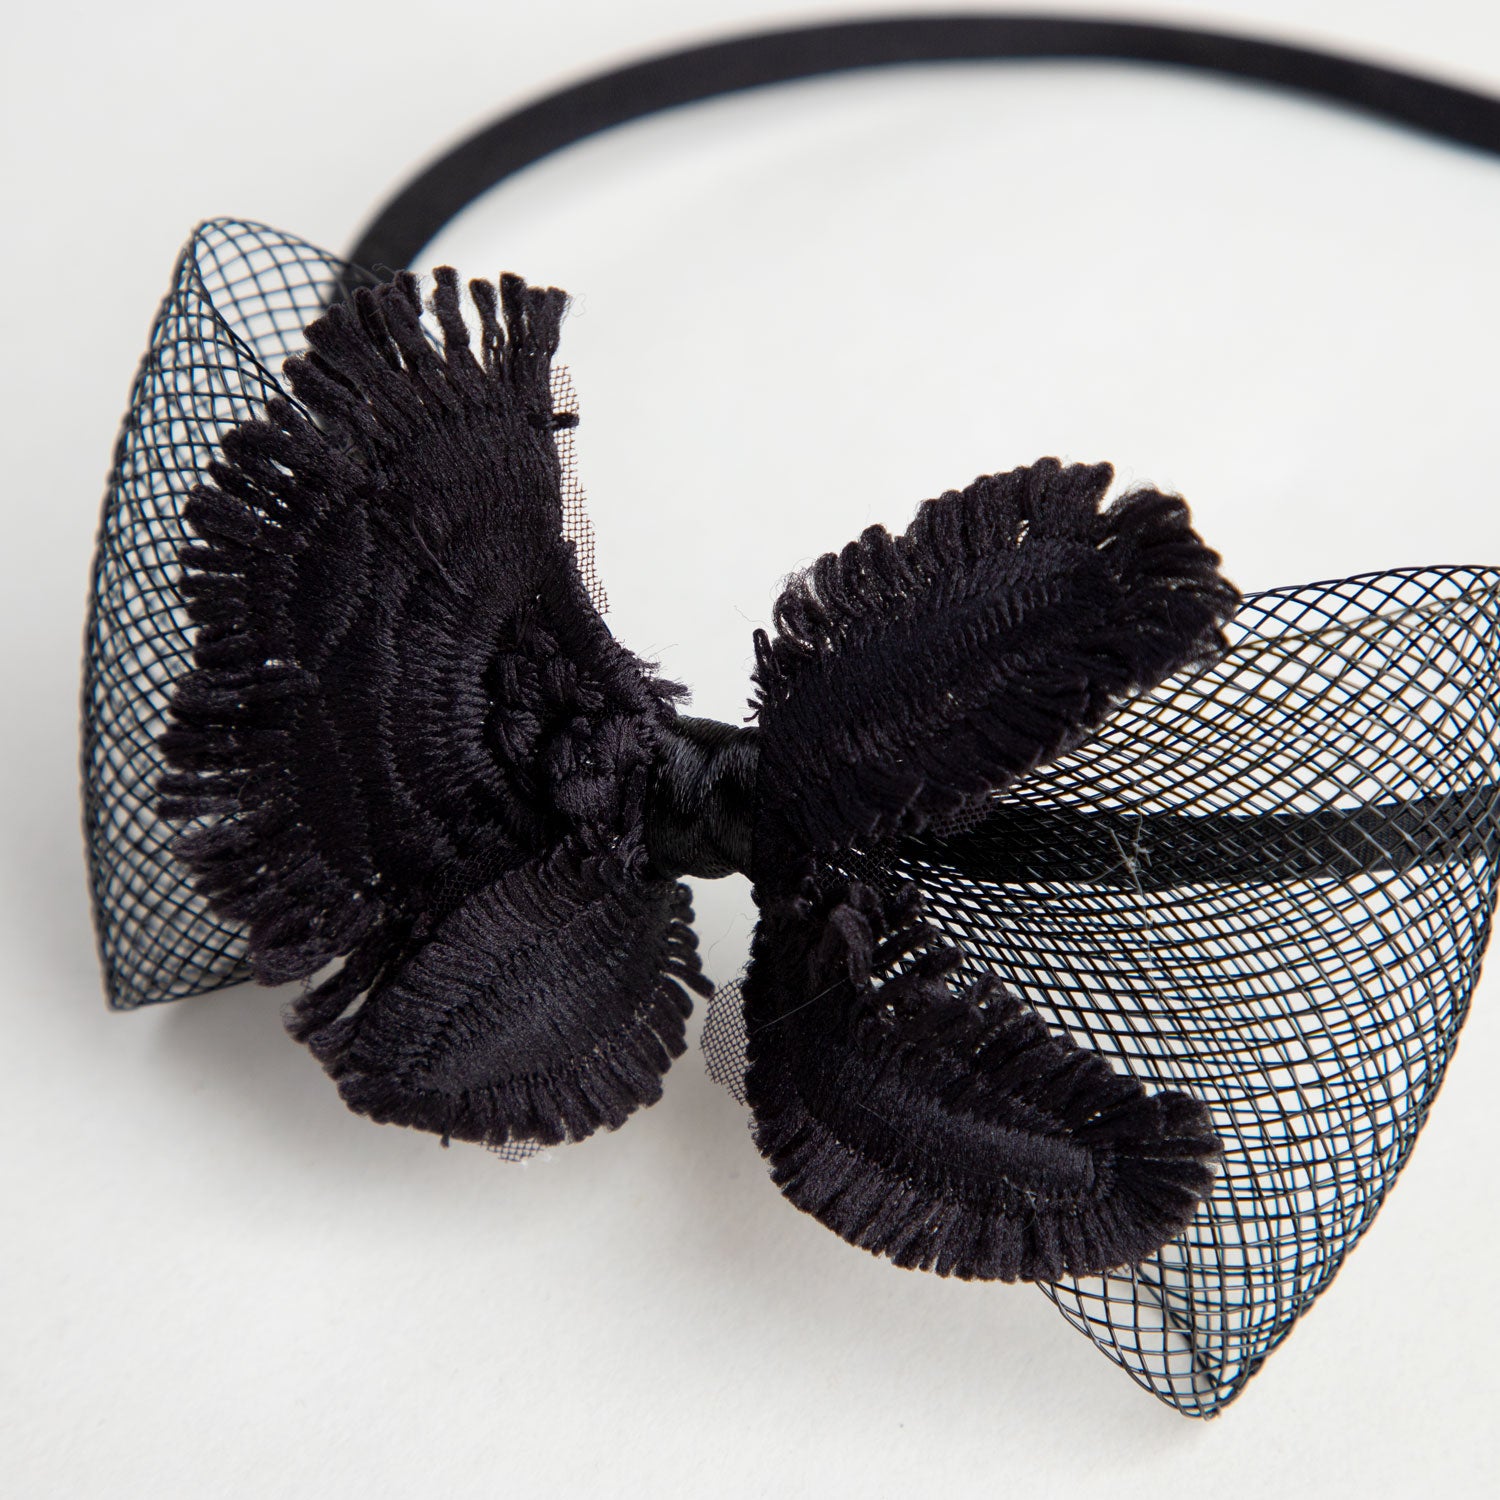 Hairband with Bow Motif